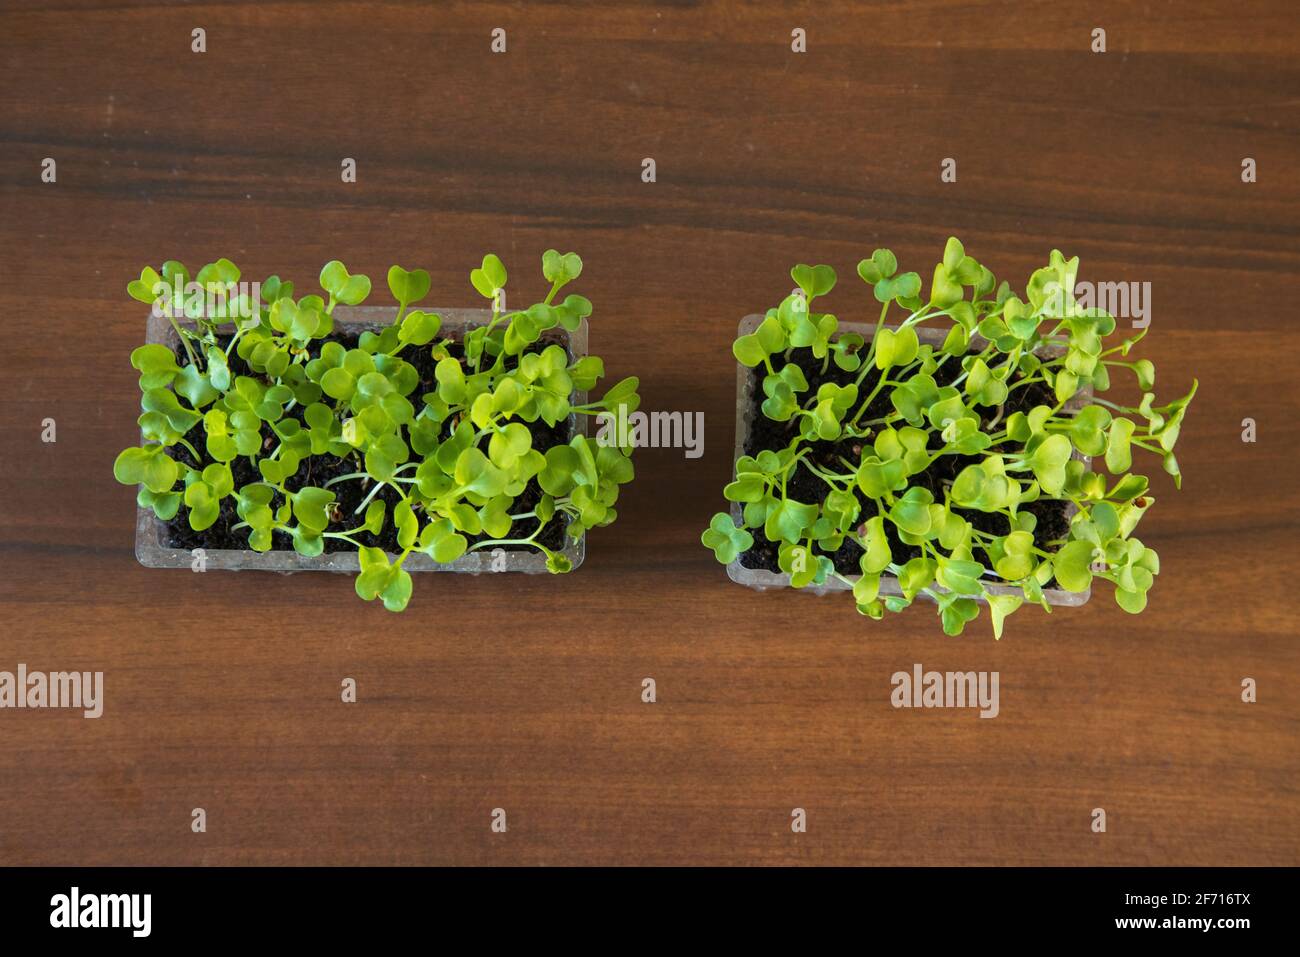 Microgreens groowing in a plastic container Stock Photo